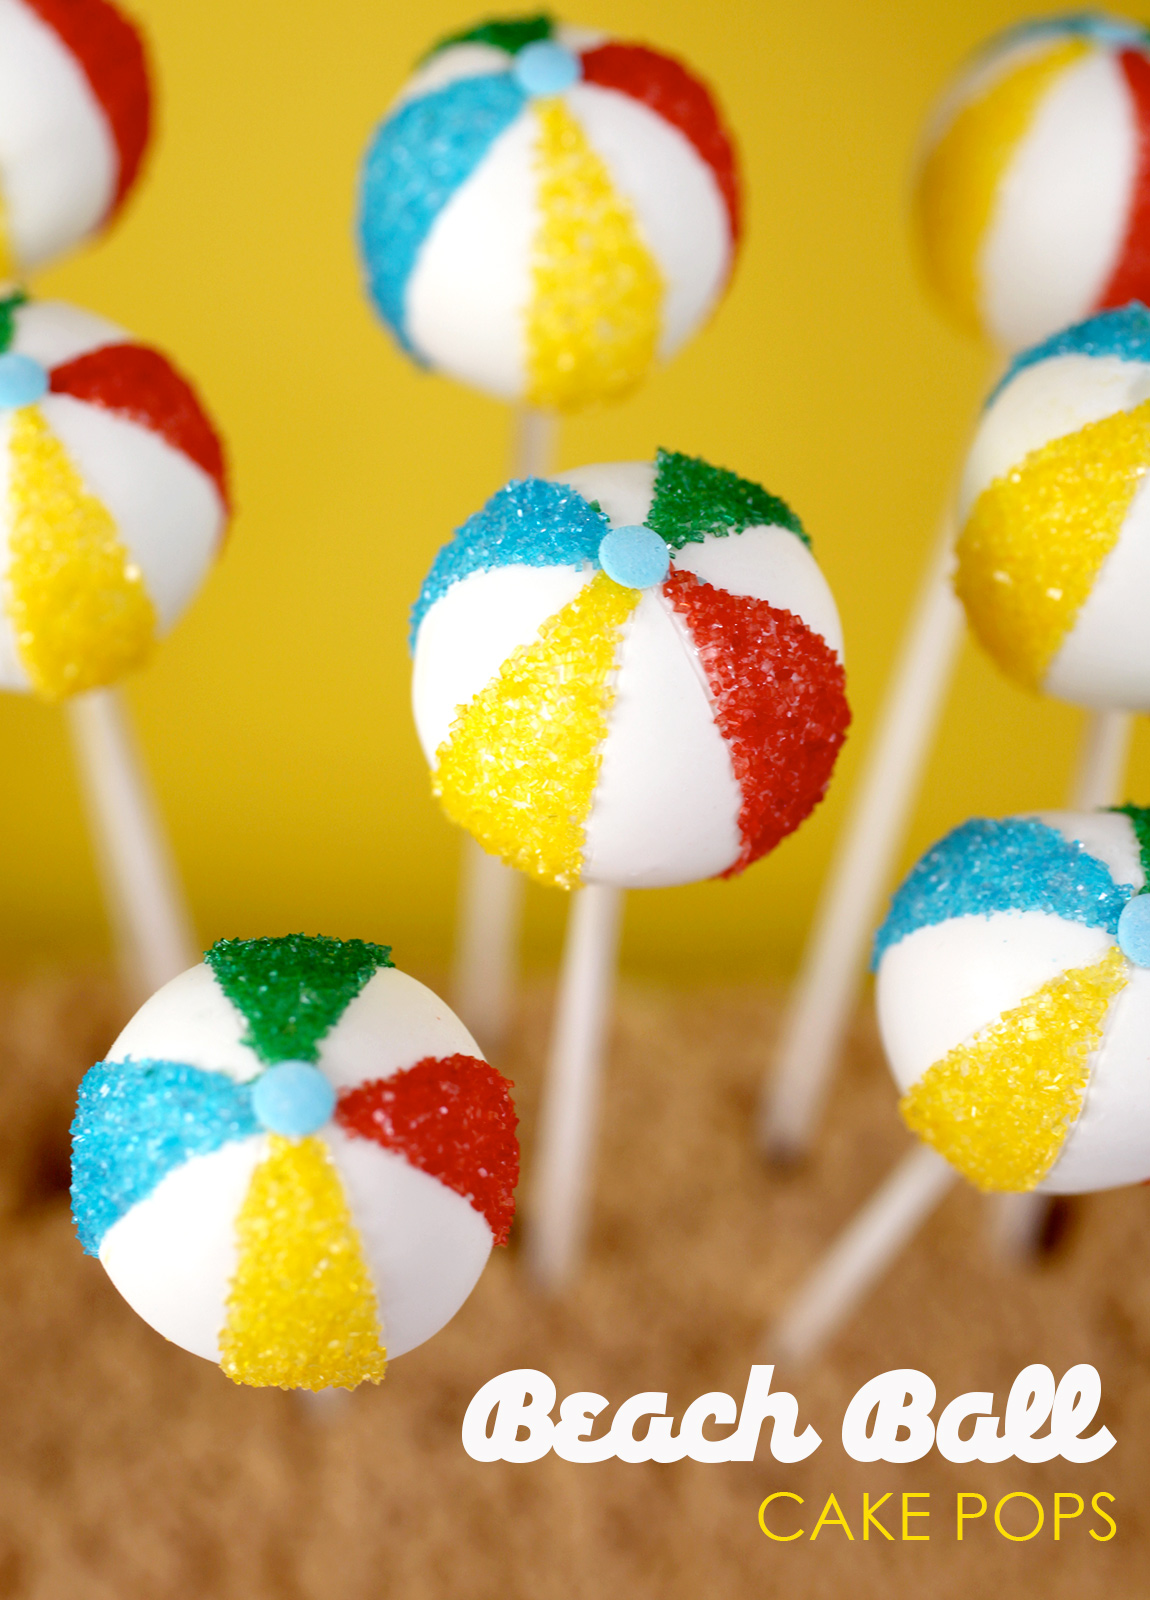 chocolate pops | It's a Cake Pop party! Join us at the Tower… | Flickr